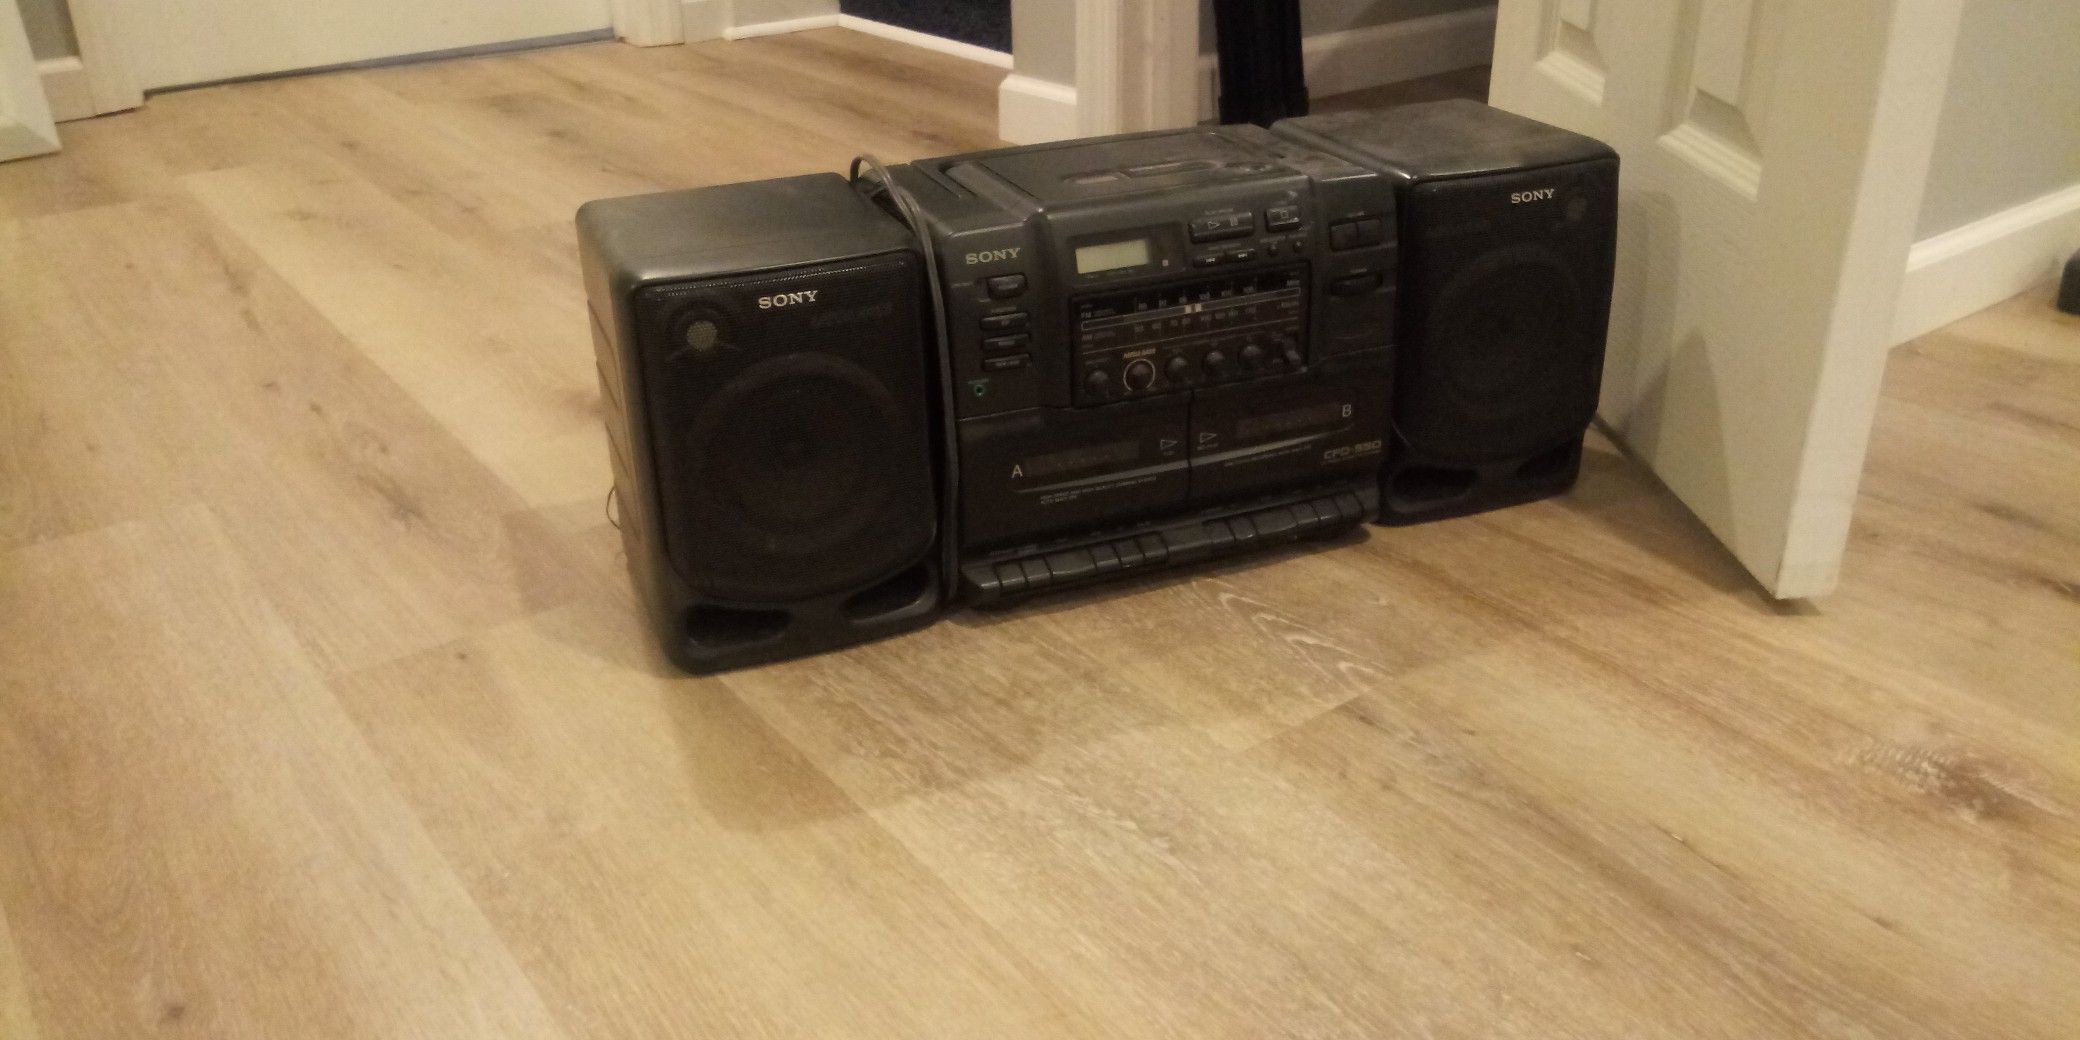 Sony CD player and cassette